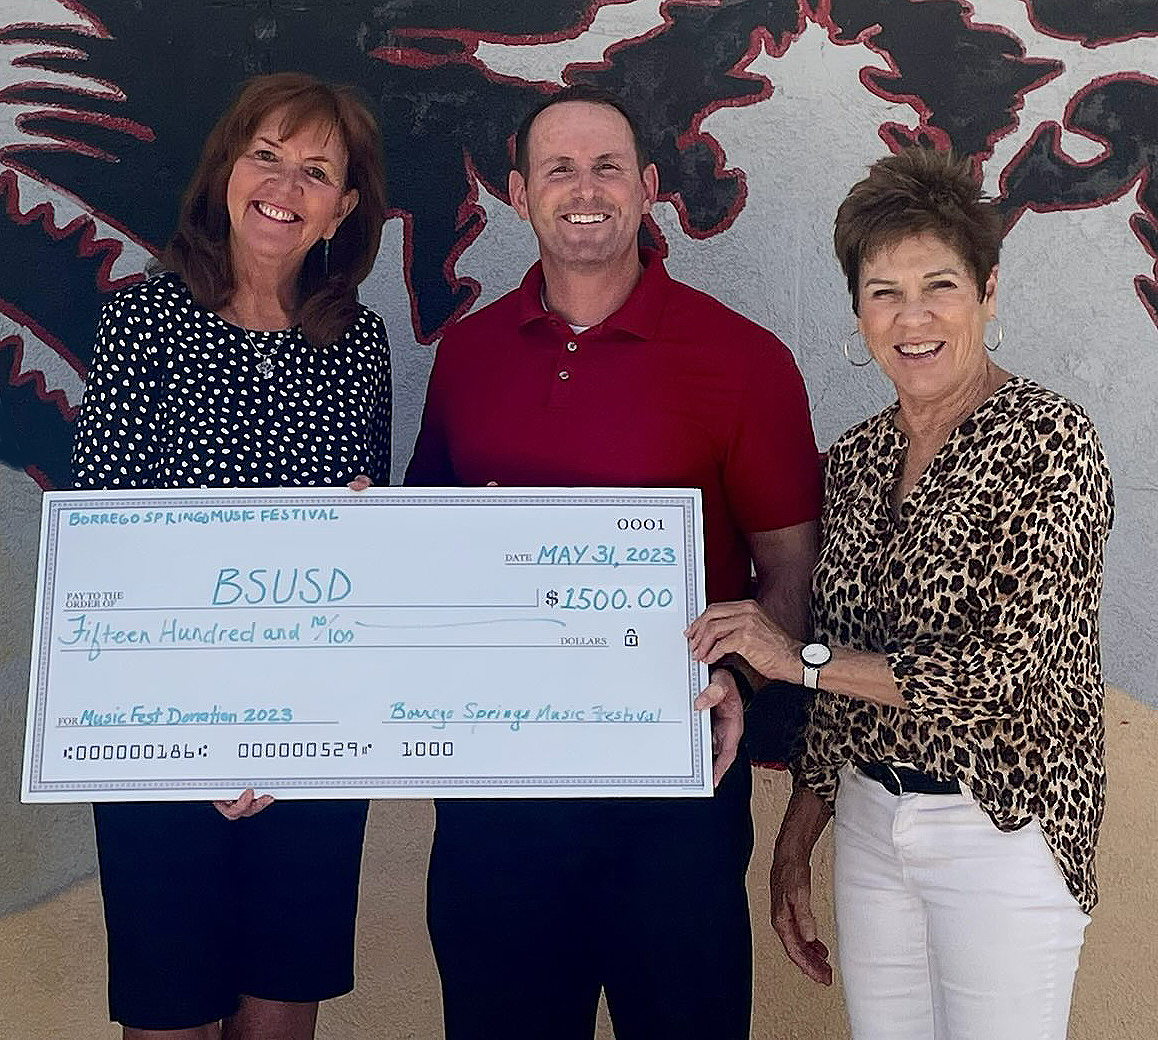 $1,500 donation to music education at the Borrego Springs School district